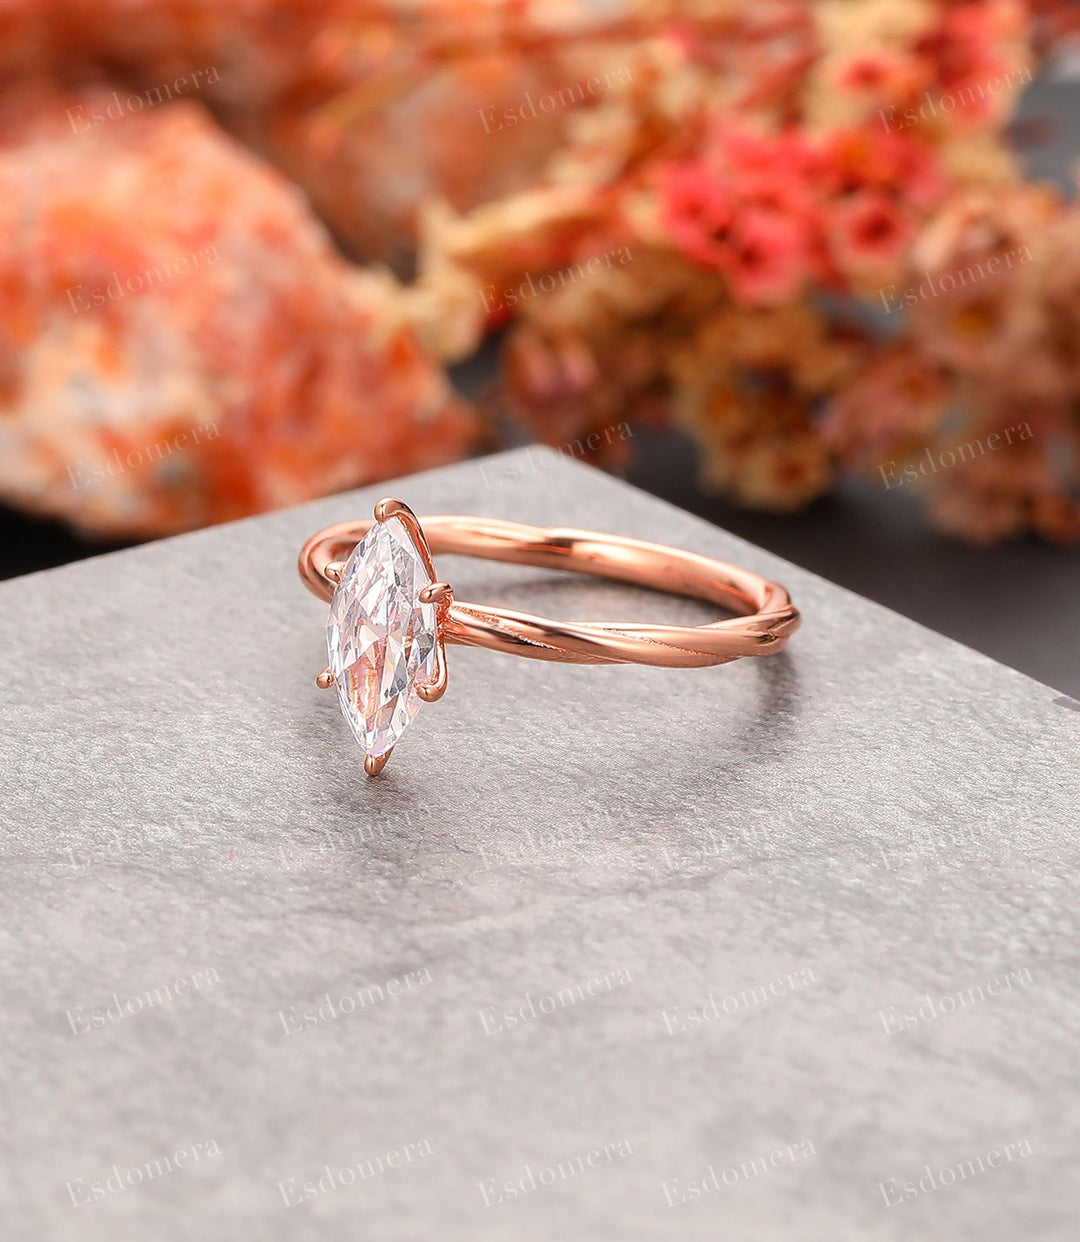 Marquise Cut 5x10mm Moissanite Solitaire Promise Ring, 14k Rose Gold Twist Shank Engagement Ring For Her, Birthday Gift - Esdomera